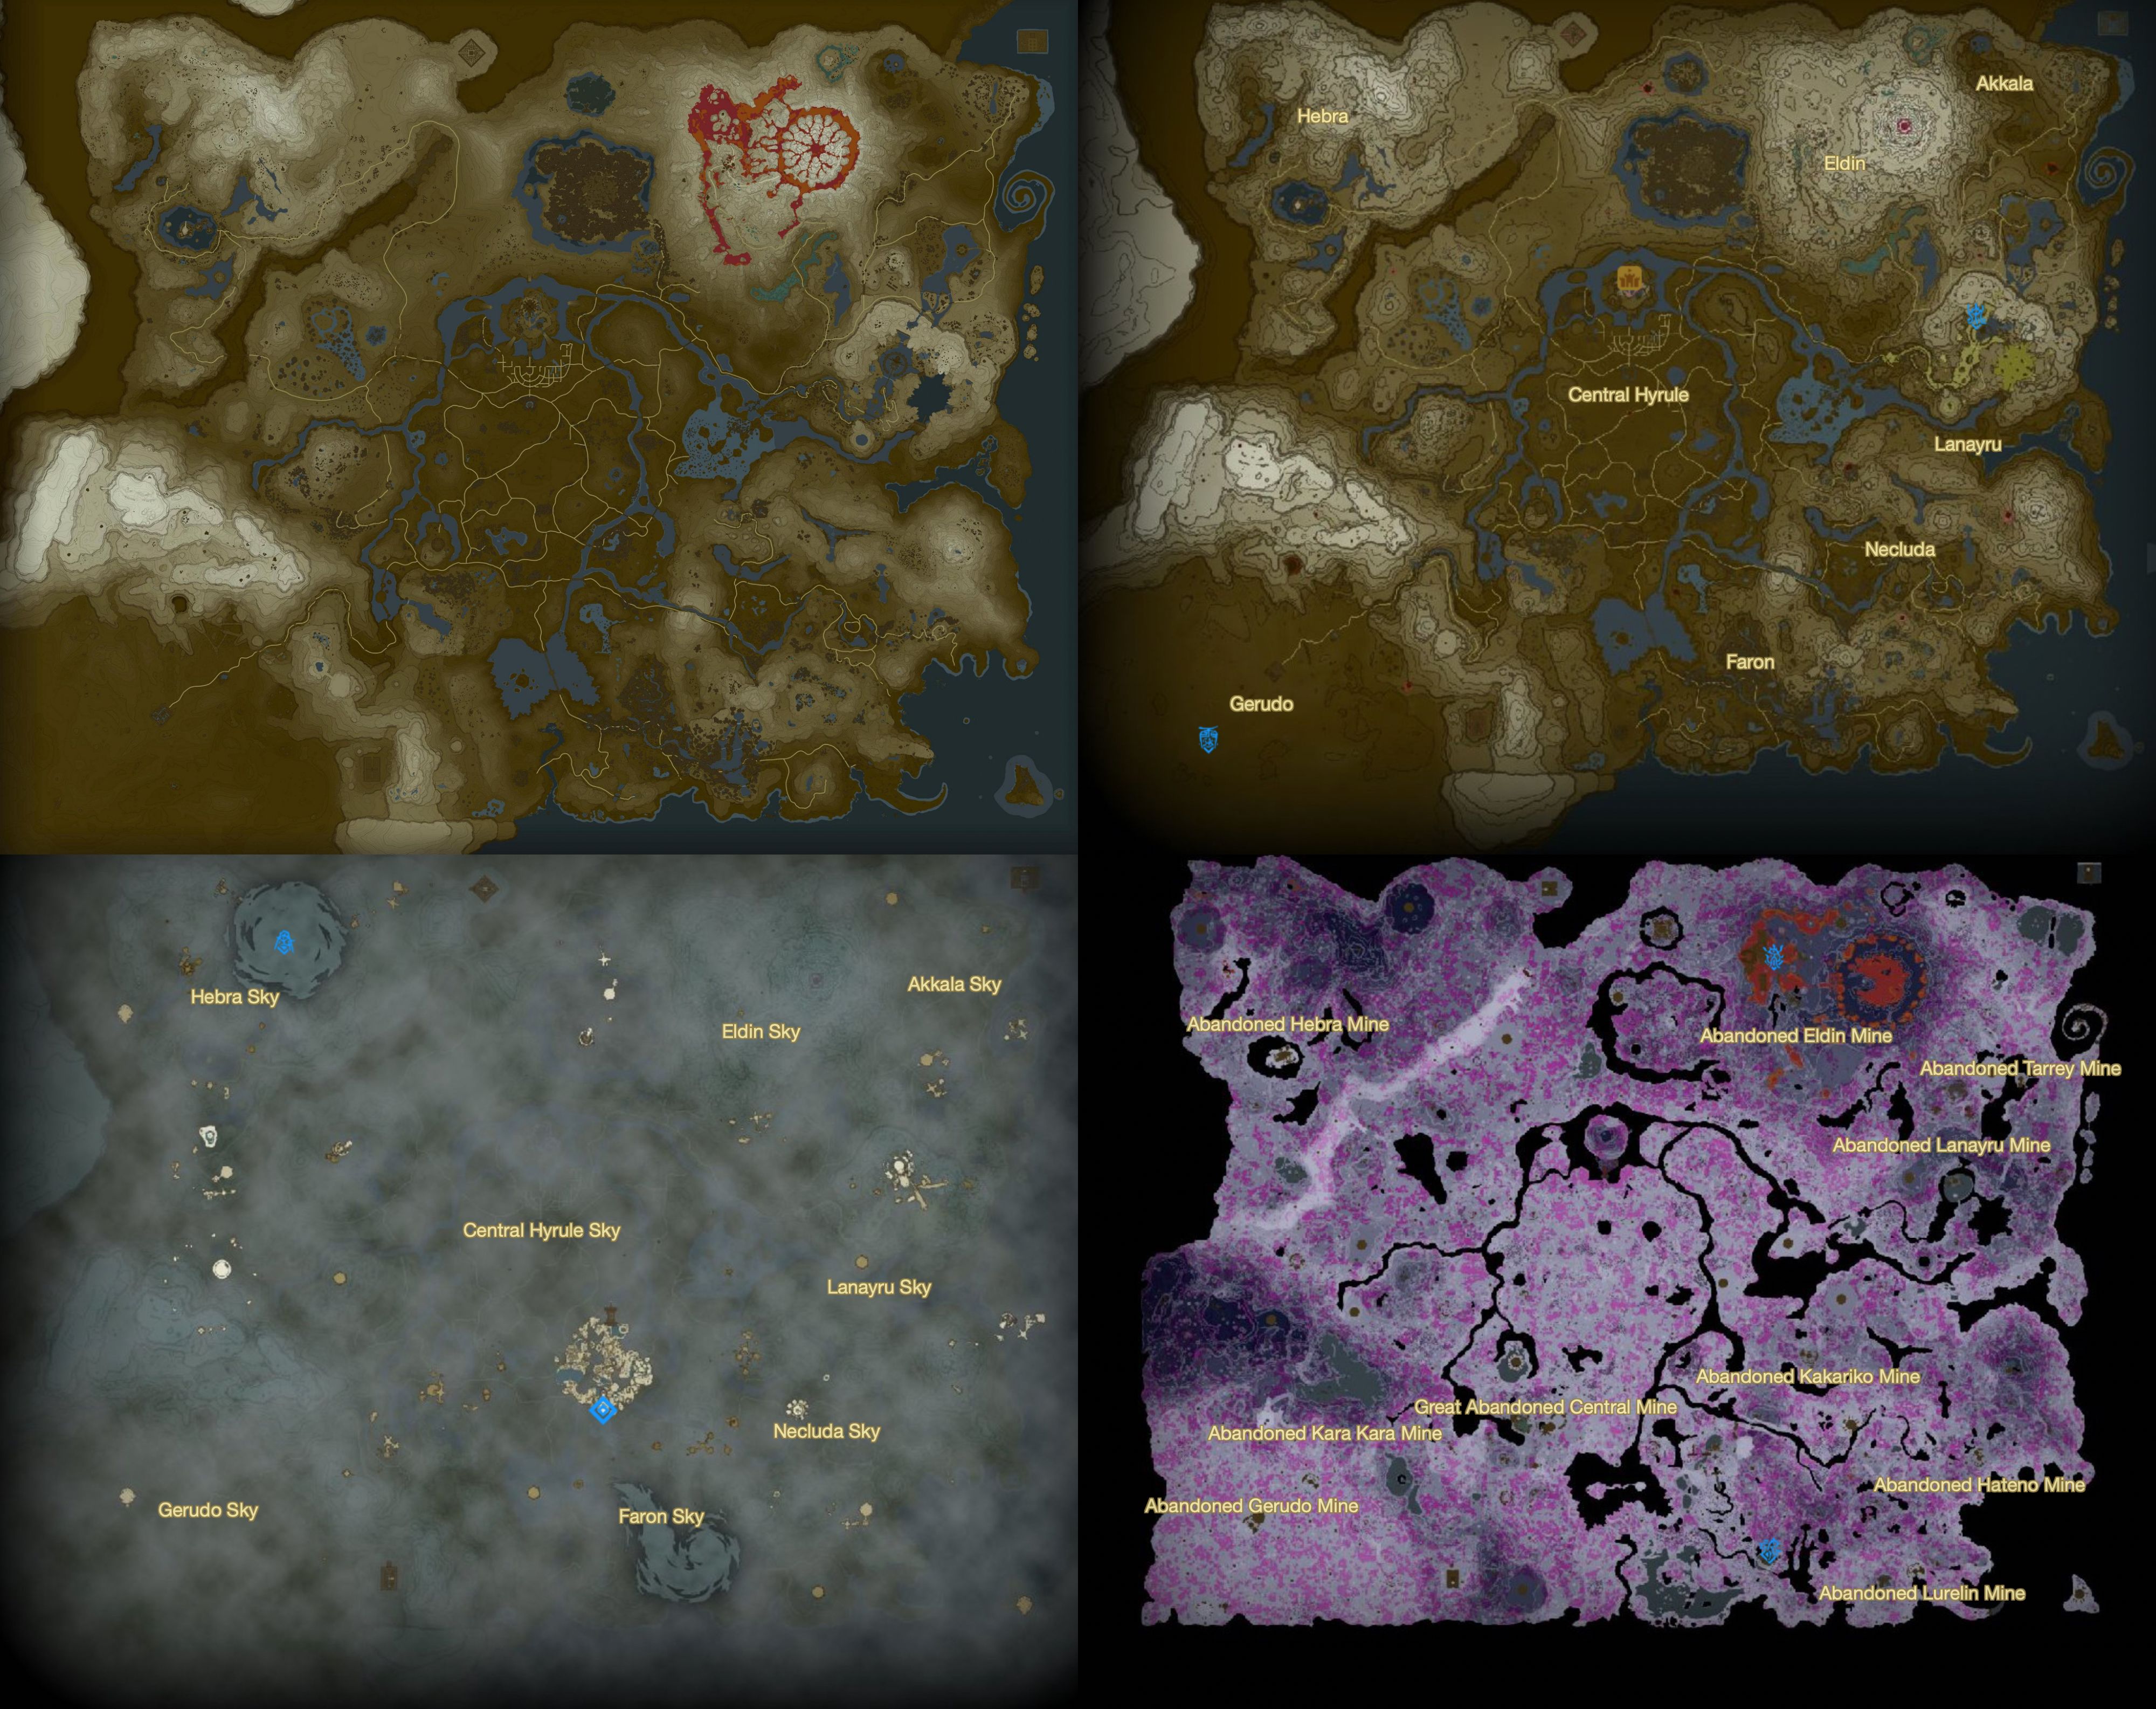 A collage of four maps - one from Breath of the Wild in the top left corner, and three from Tears of the Kingdom showing the game's multi-level design.